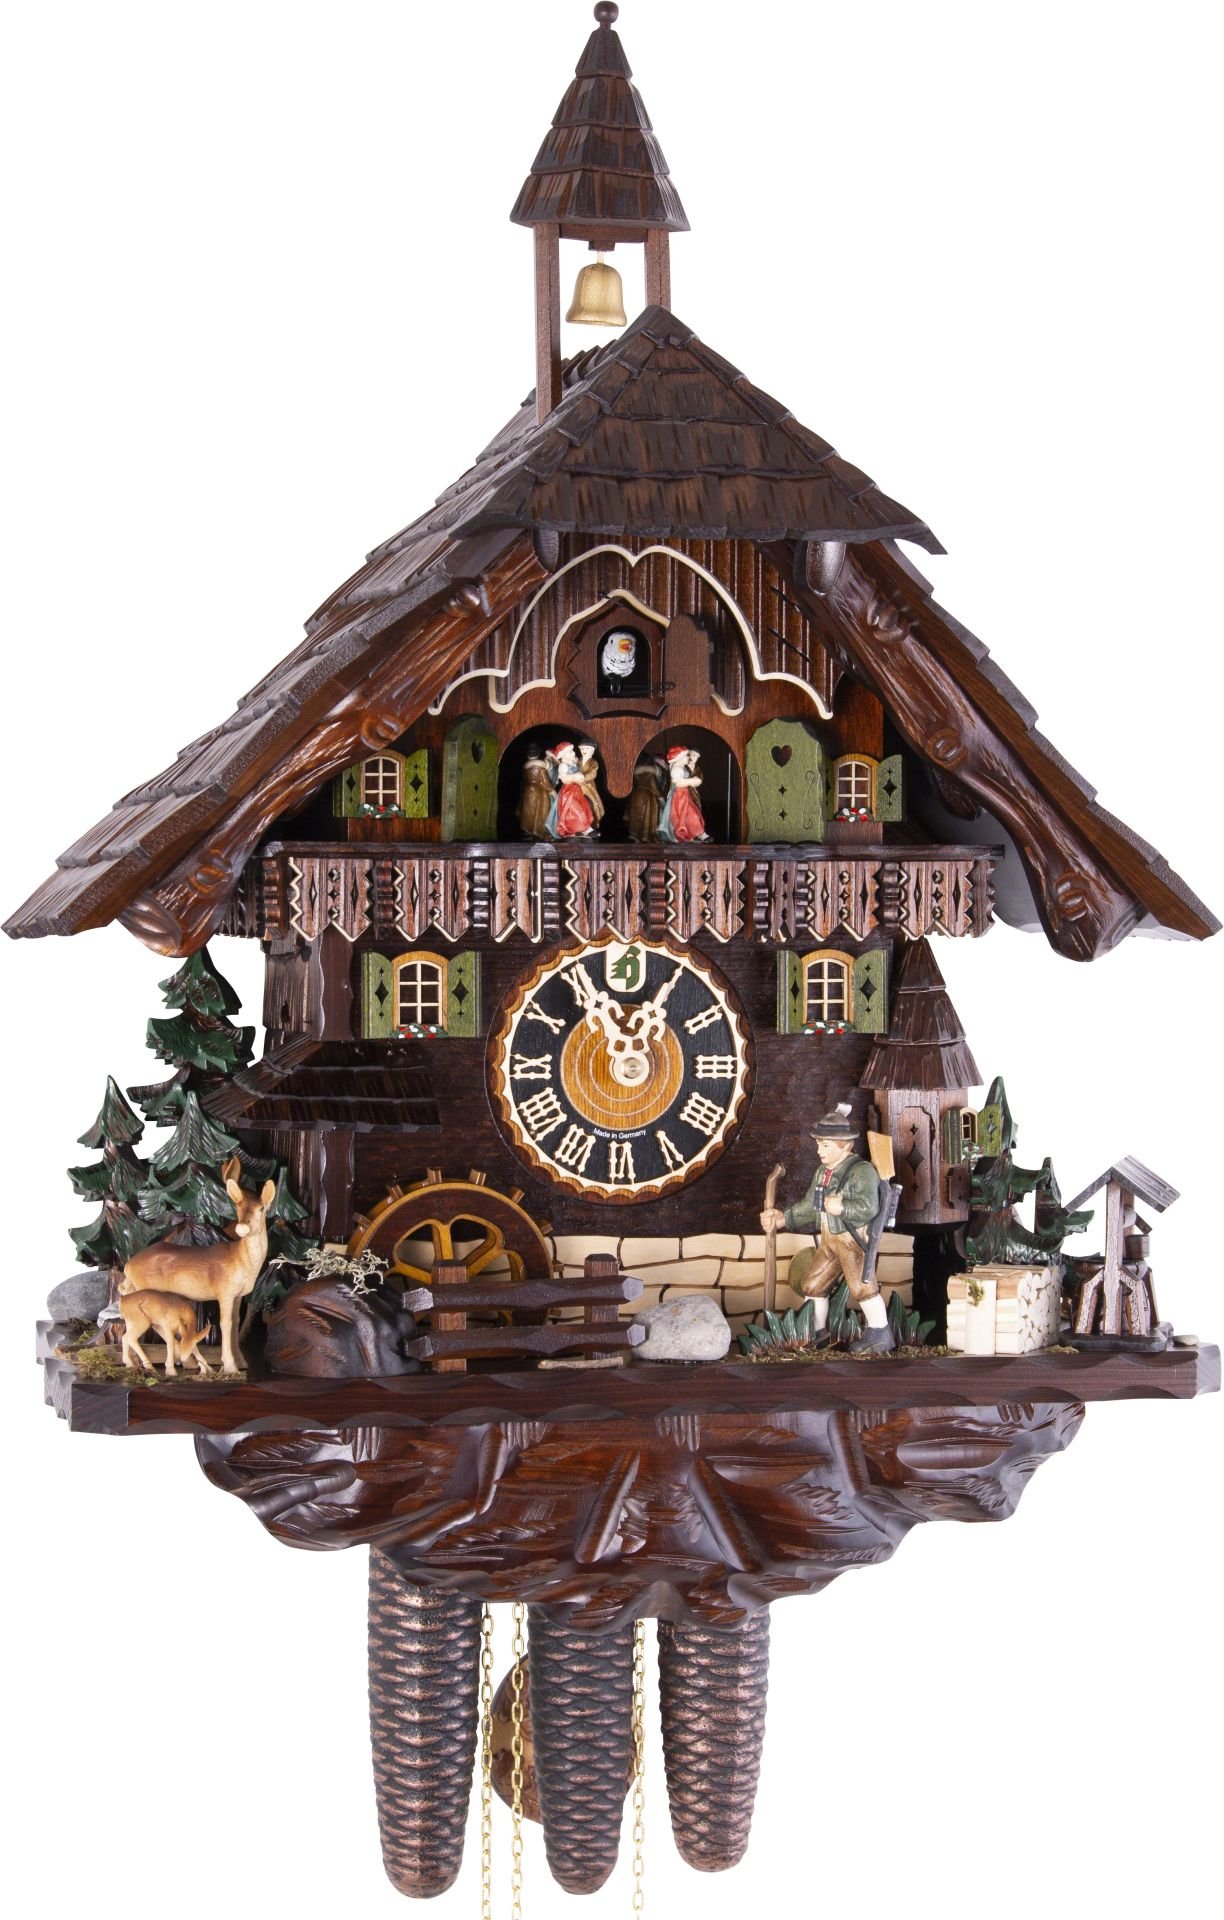 Cuckoo Clock Chalet Style 8 Day Movement 62cm by Hönes